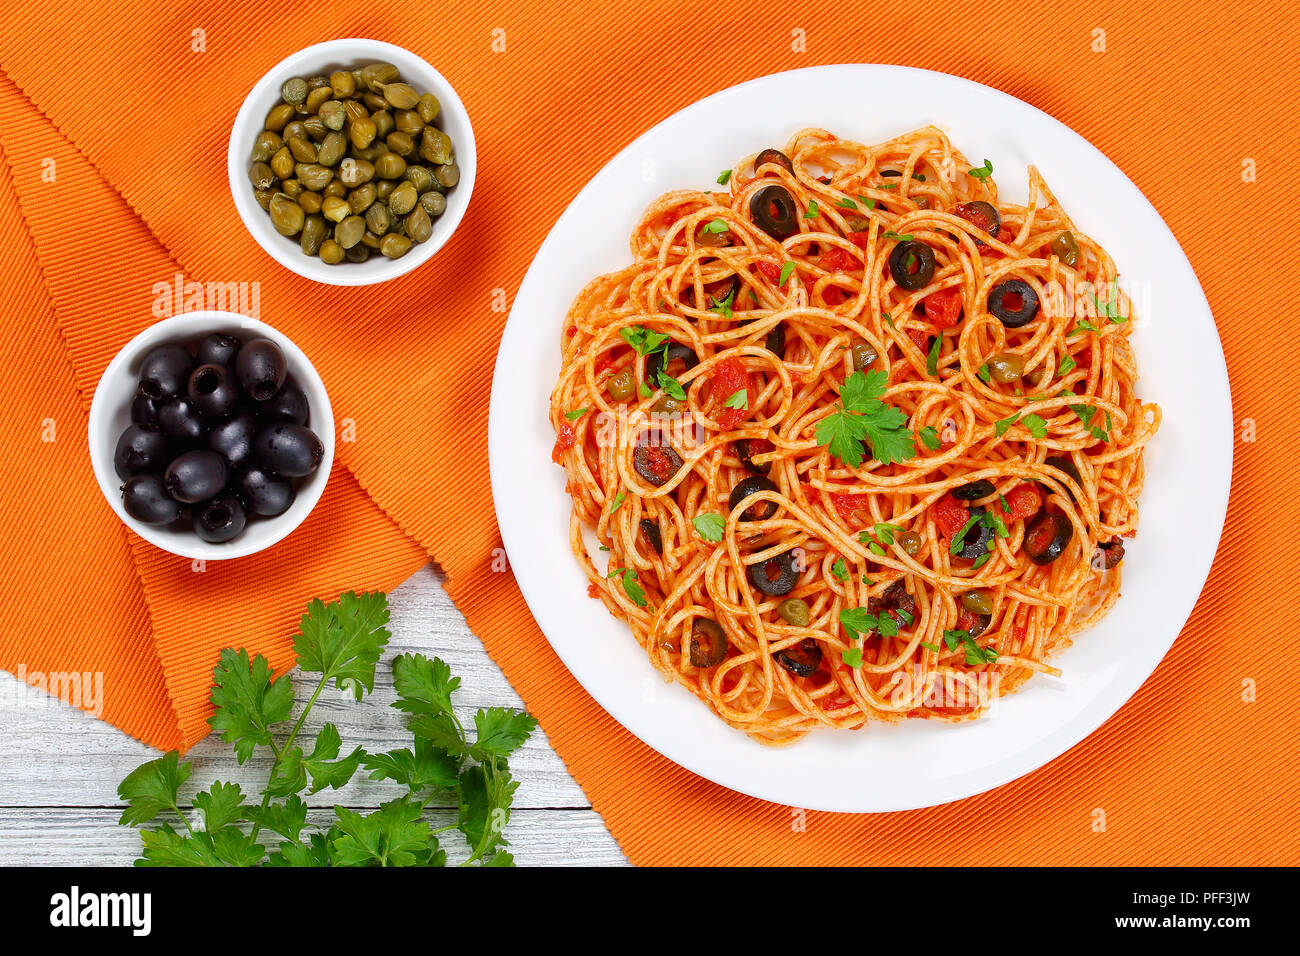 Delicious Spaghetti alla puttanesca with capers, olives, anchovies, tomato sauce sprinkled with parsley on white plate on table mat with olive and cap Stock Photo